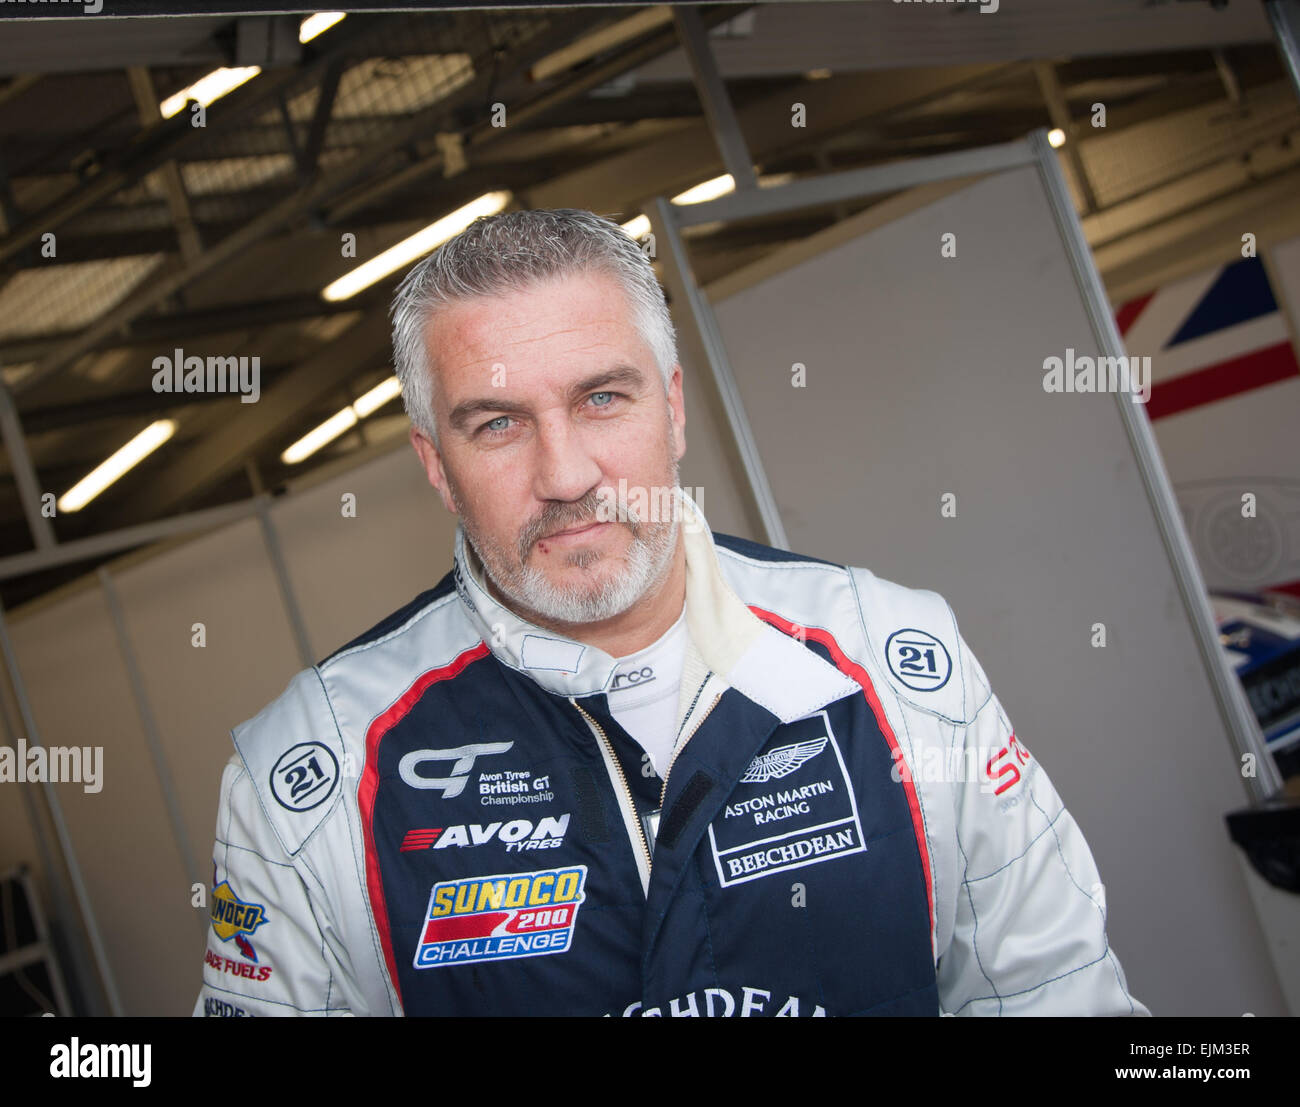 Silverstone, UK. 29th Mar, 2015. Paul Hollywood from the Great British Bake Off taking part in Britcar at Silverstone in the UK Credit:  steven roe/Alamy Live News Stock Photo